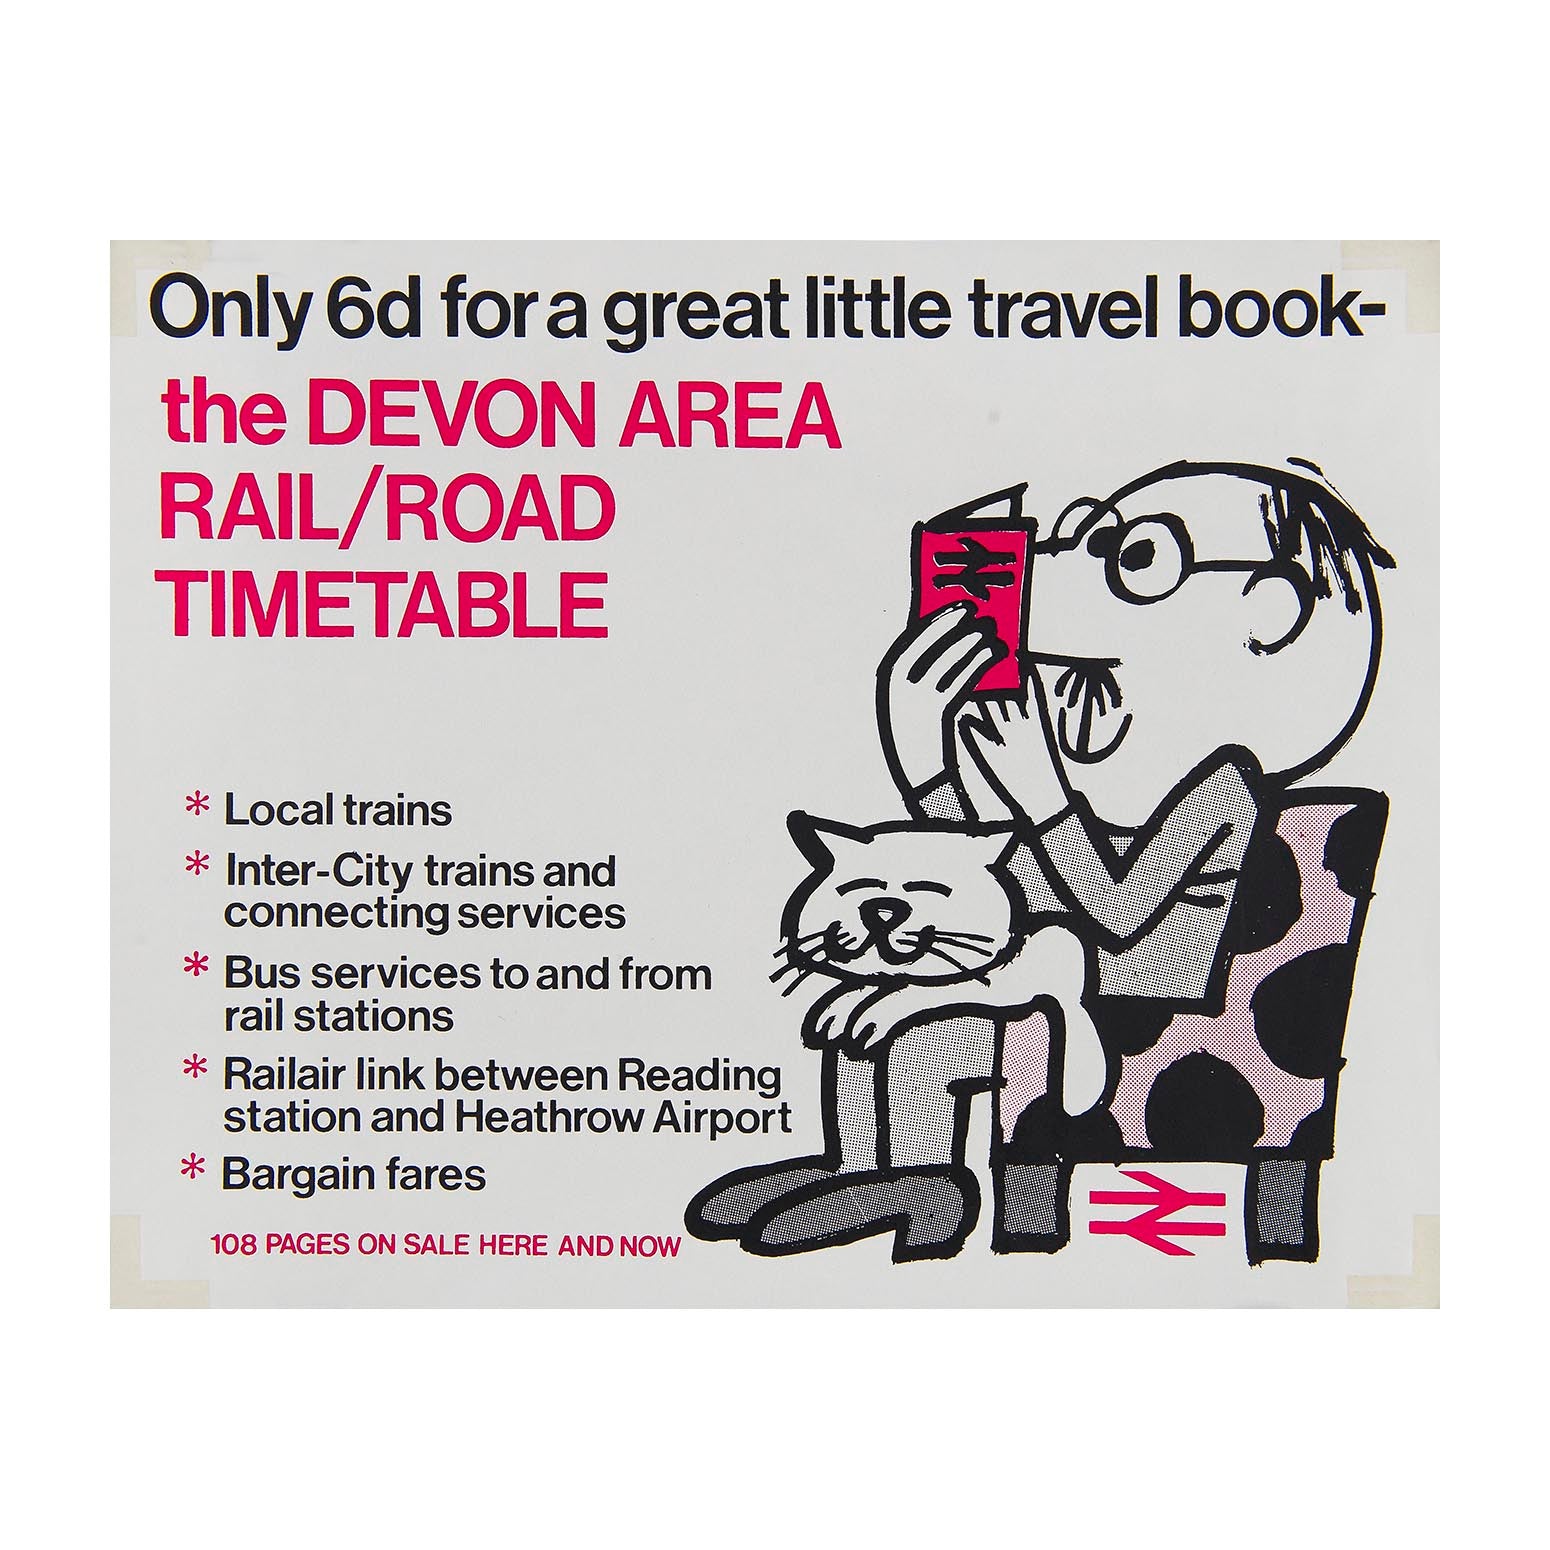 Only 6d for a great little travel book. The Devon area rail and road timetable